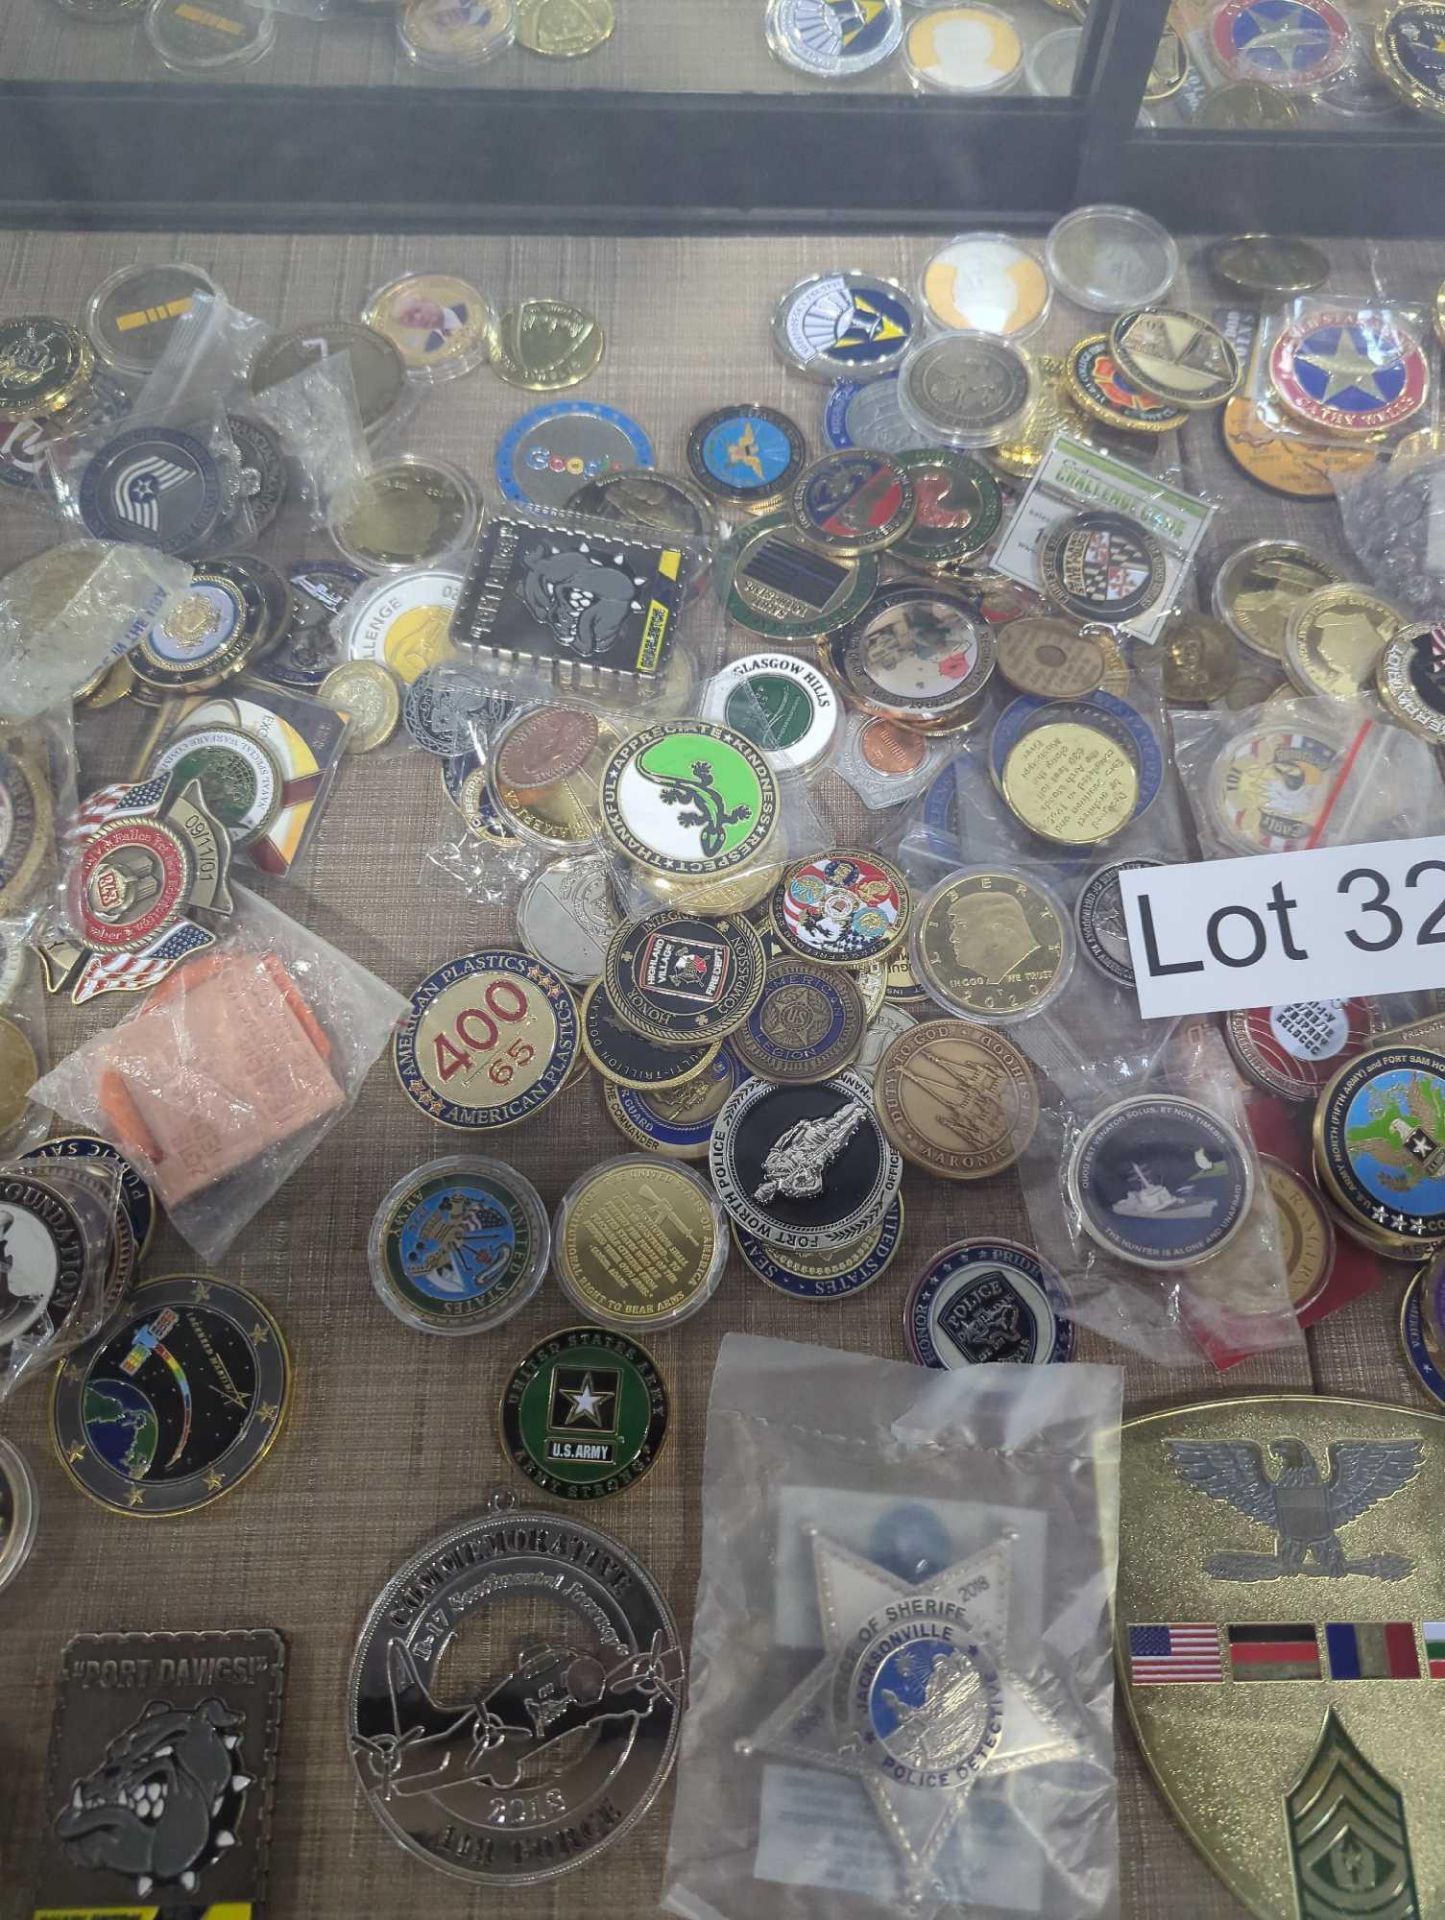 miscellaneous challenge coins and commemorative coins - Image 4 of 6